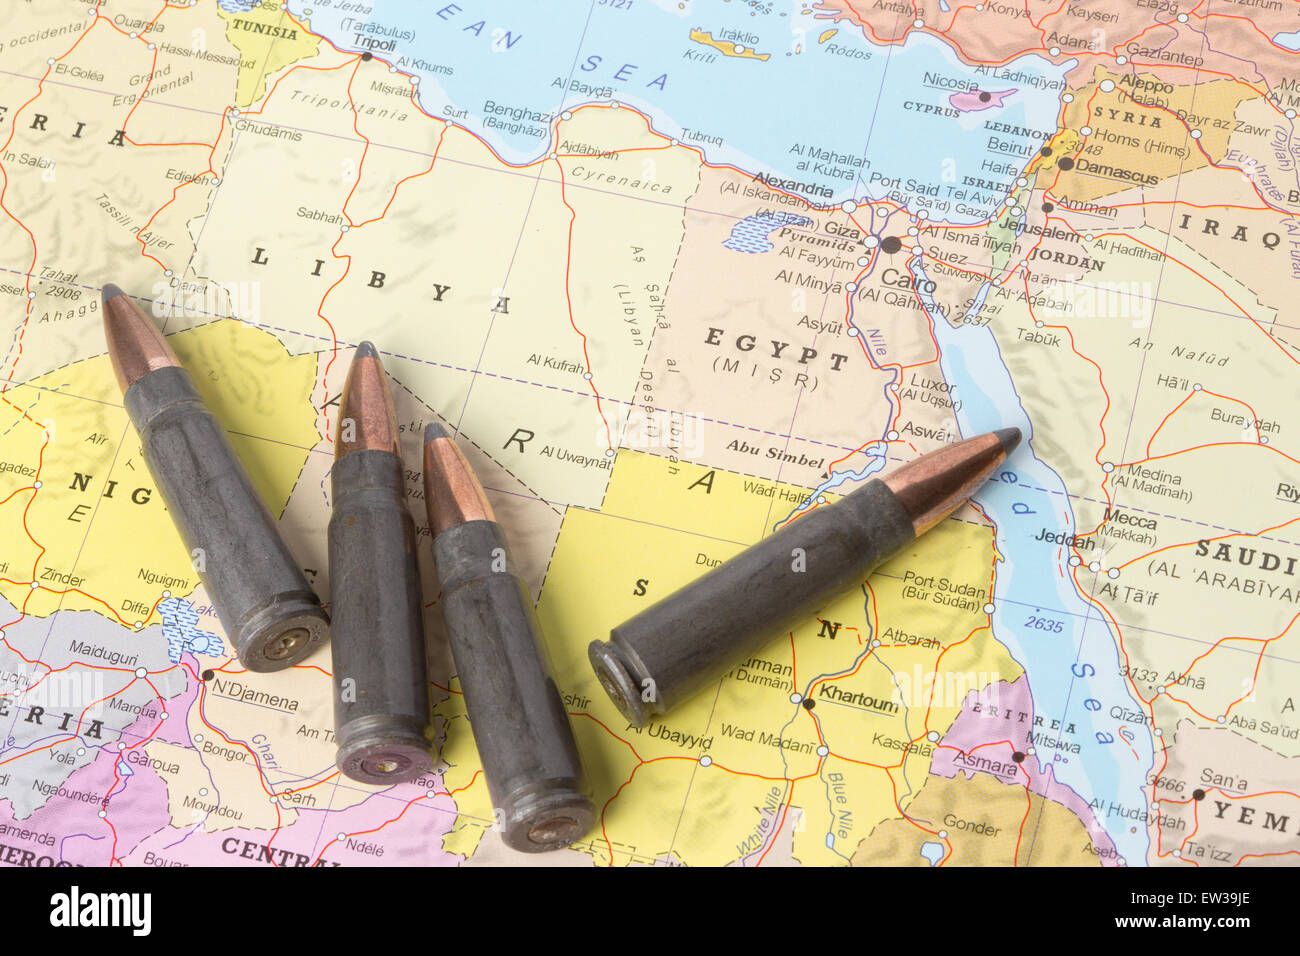 Four bullets on the geographical map of Libya and Egypt in North Africa. Conceptual image for war, conflict, violence. Stock Photo